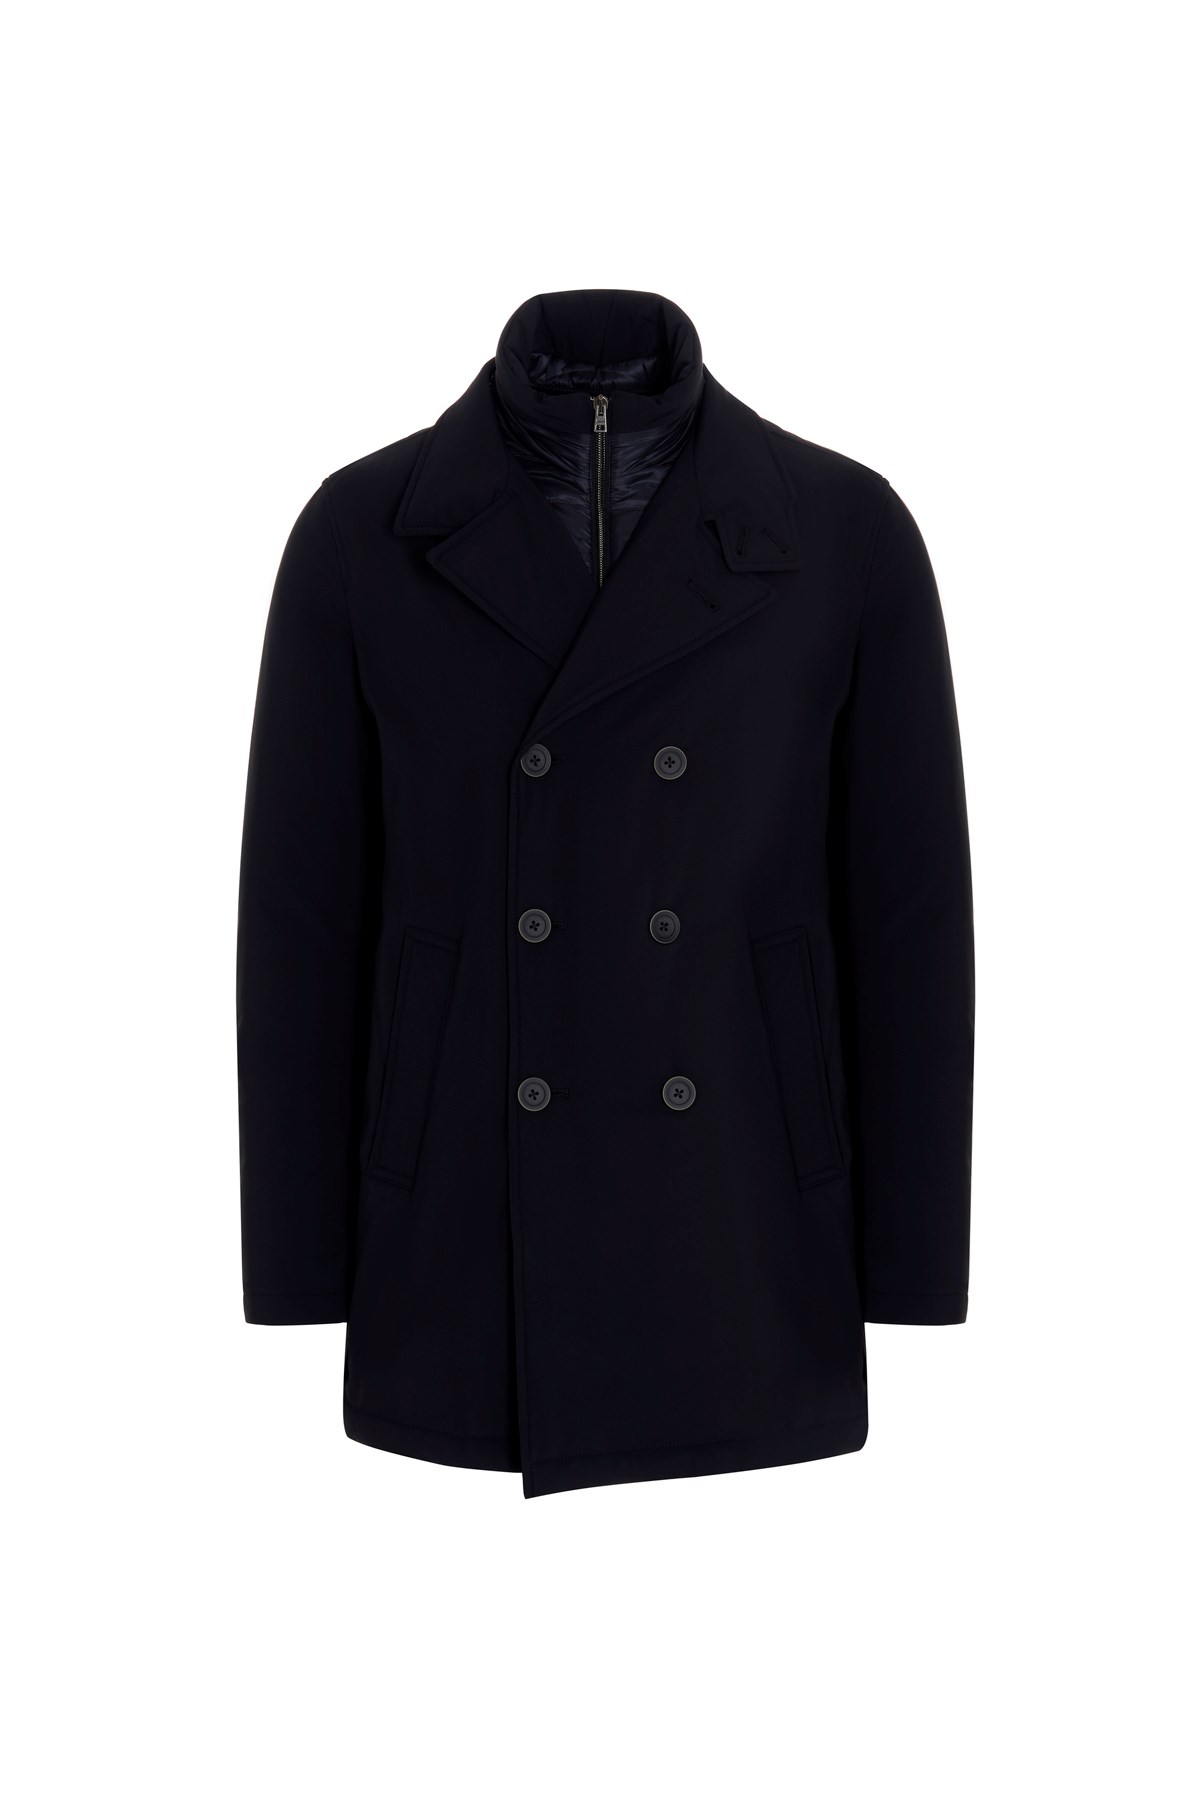 HERNO Double-Breasted Peacoat